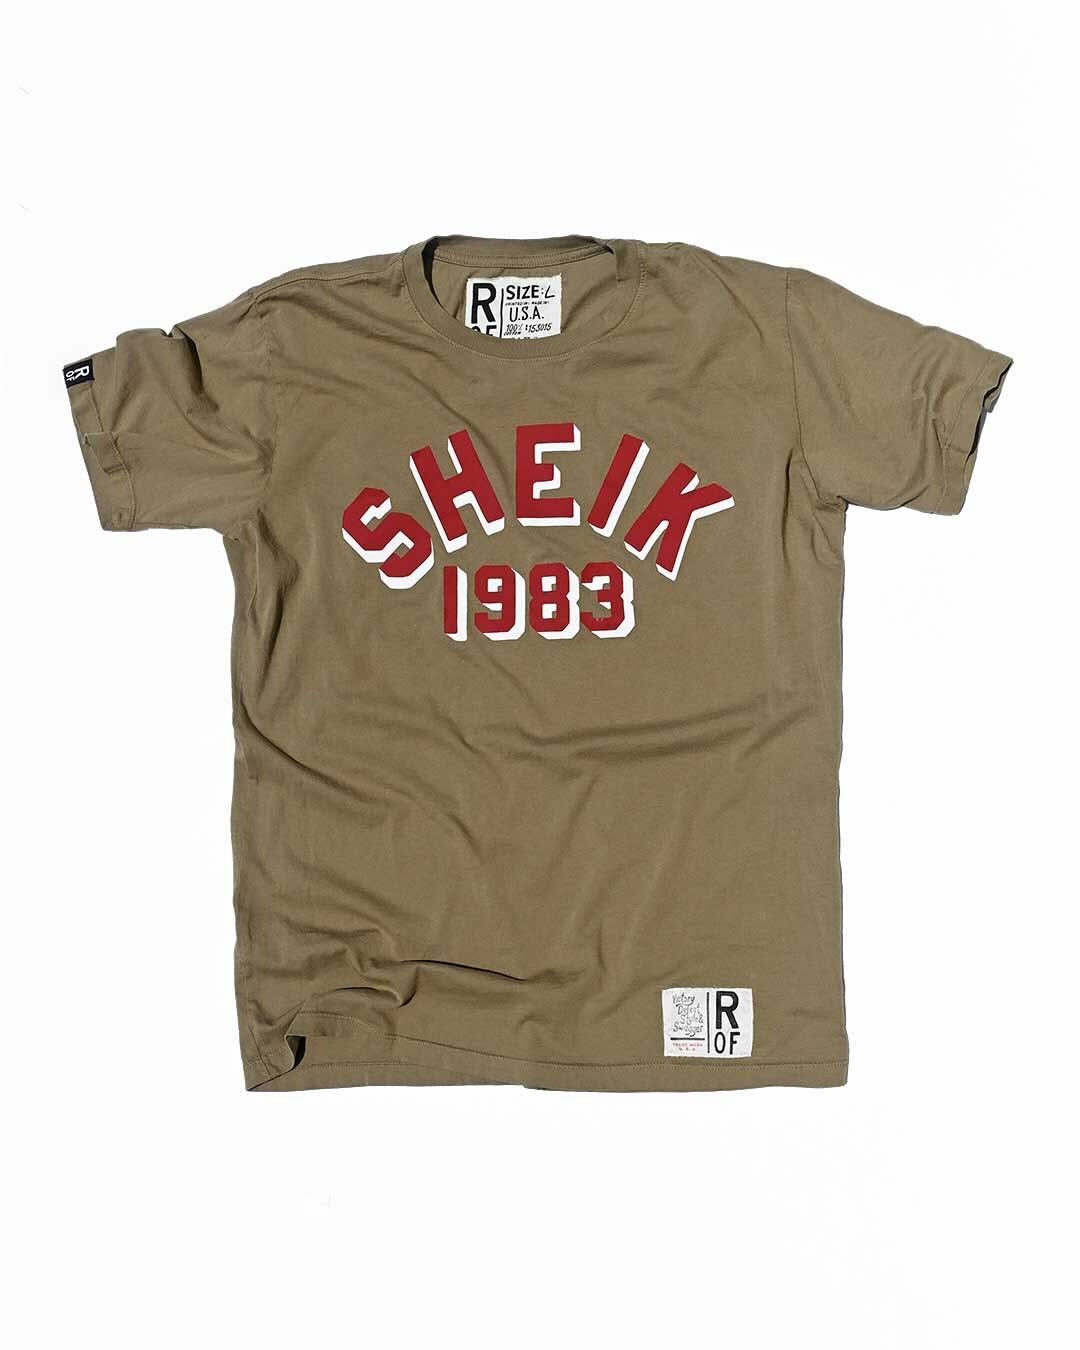 The Iron Sheik 1983 Champ Olive Tee - Roots of Fight Canada